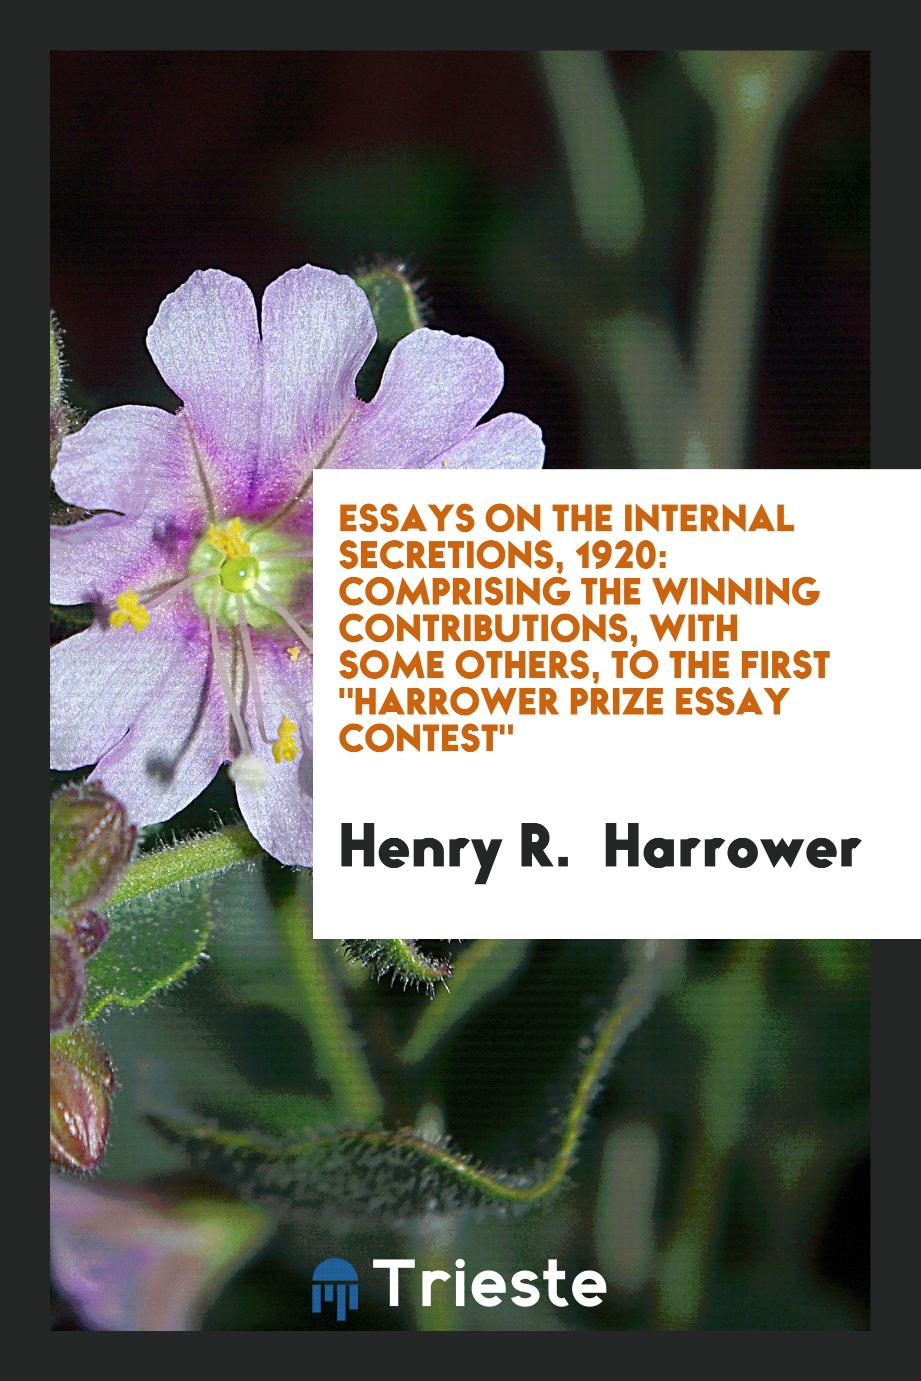 Essays on the Internal Secretions, 1920: Comprising the Winning Contributions, with Some Others, to the First "Harrower Prize Essay Contest"